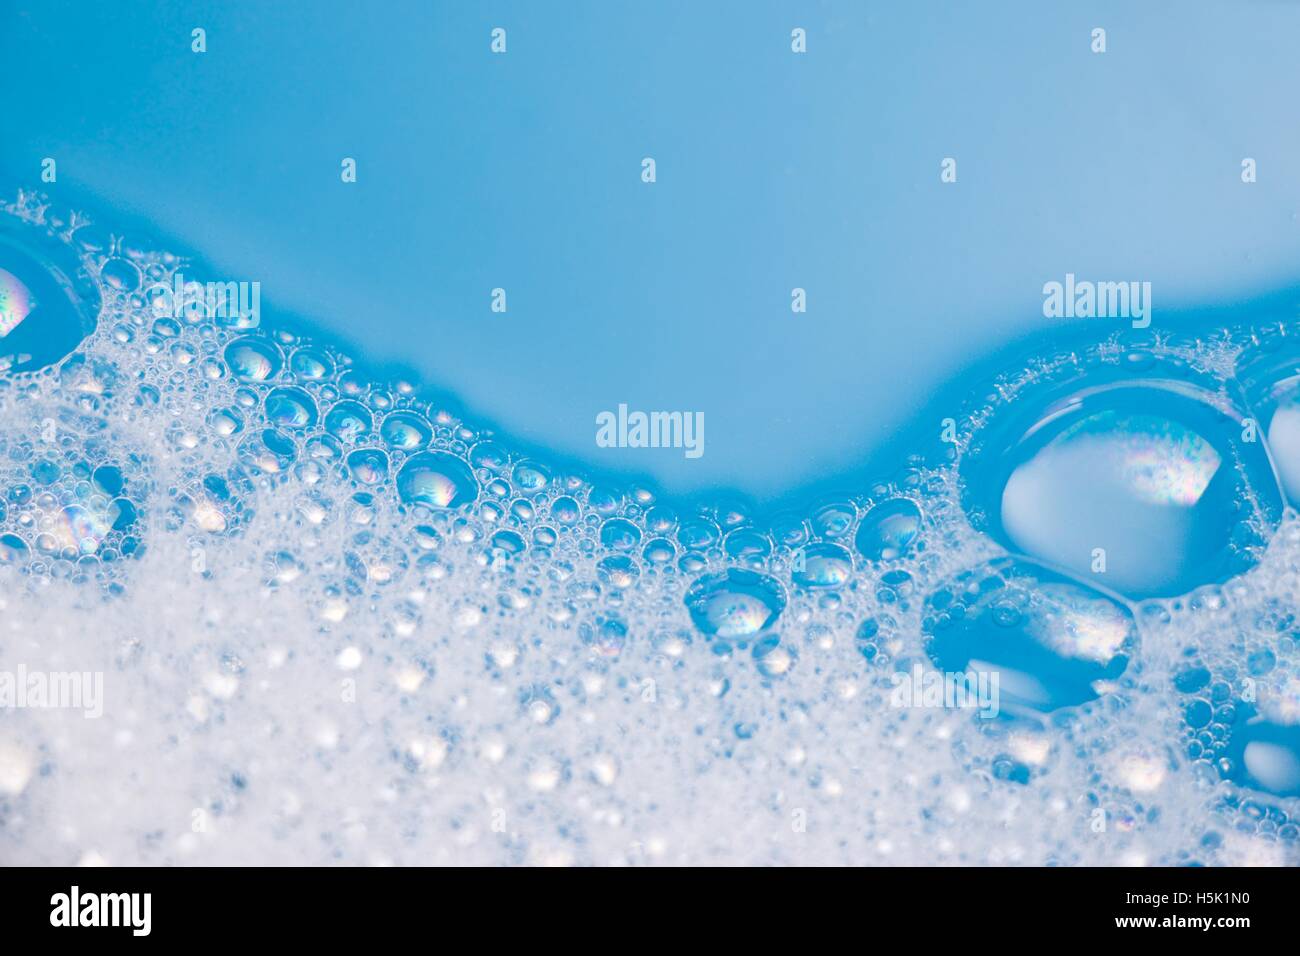 Abstract Background Of Soap Foam Suds Shower Blue Backgr